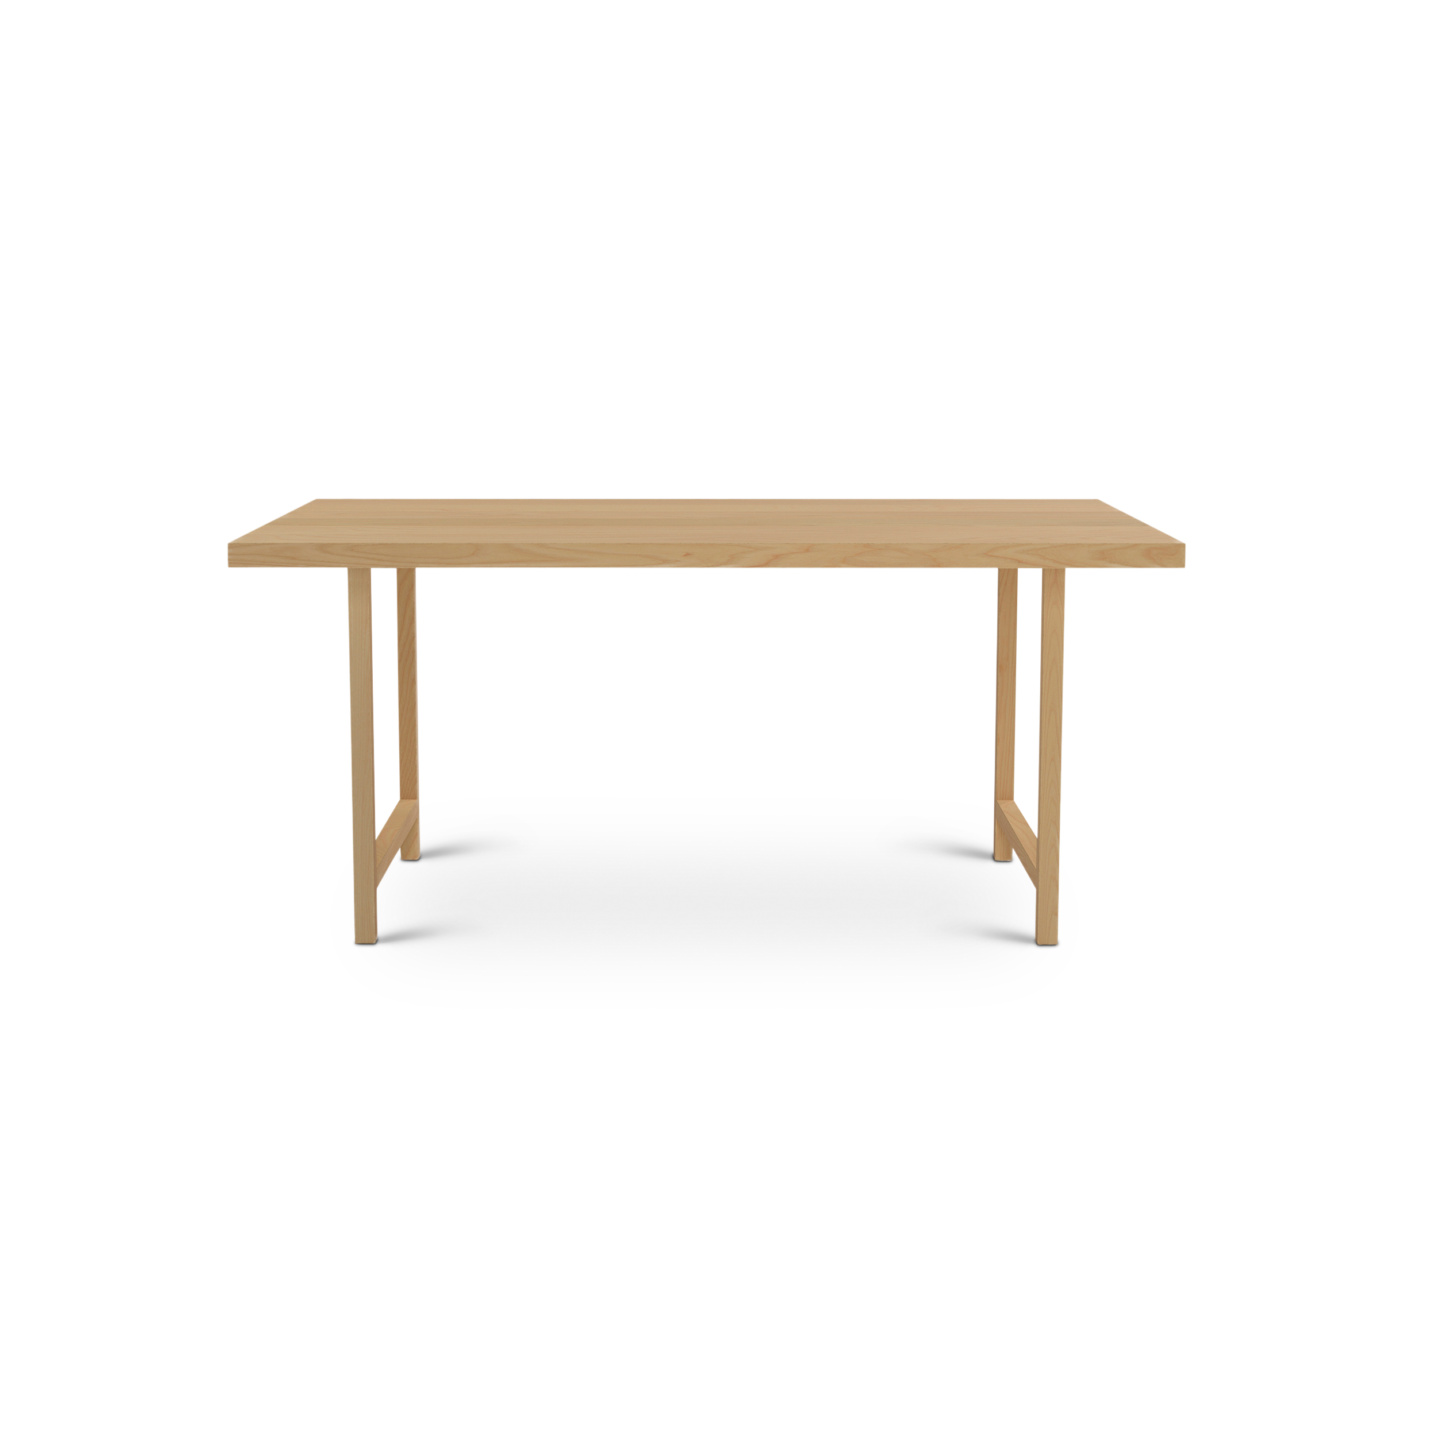 Beautiful and simple solid ash table